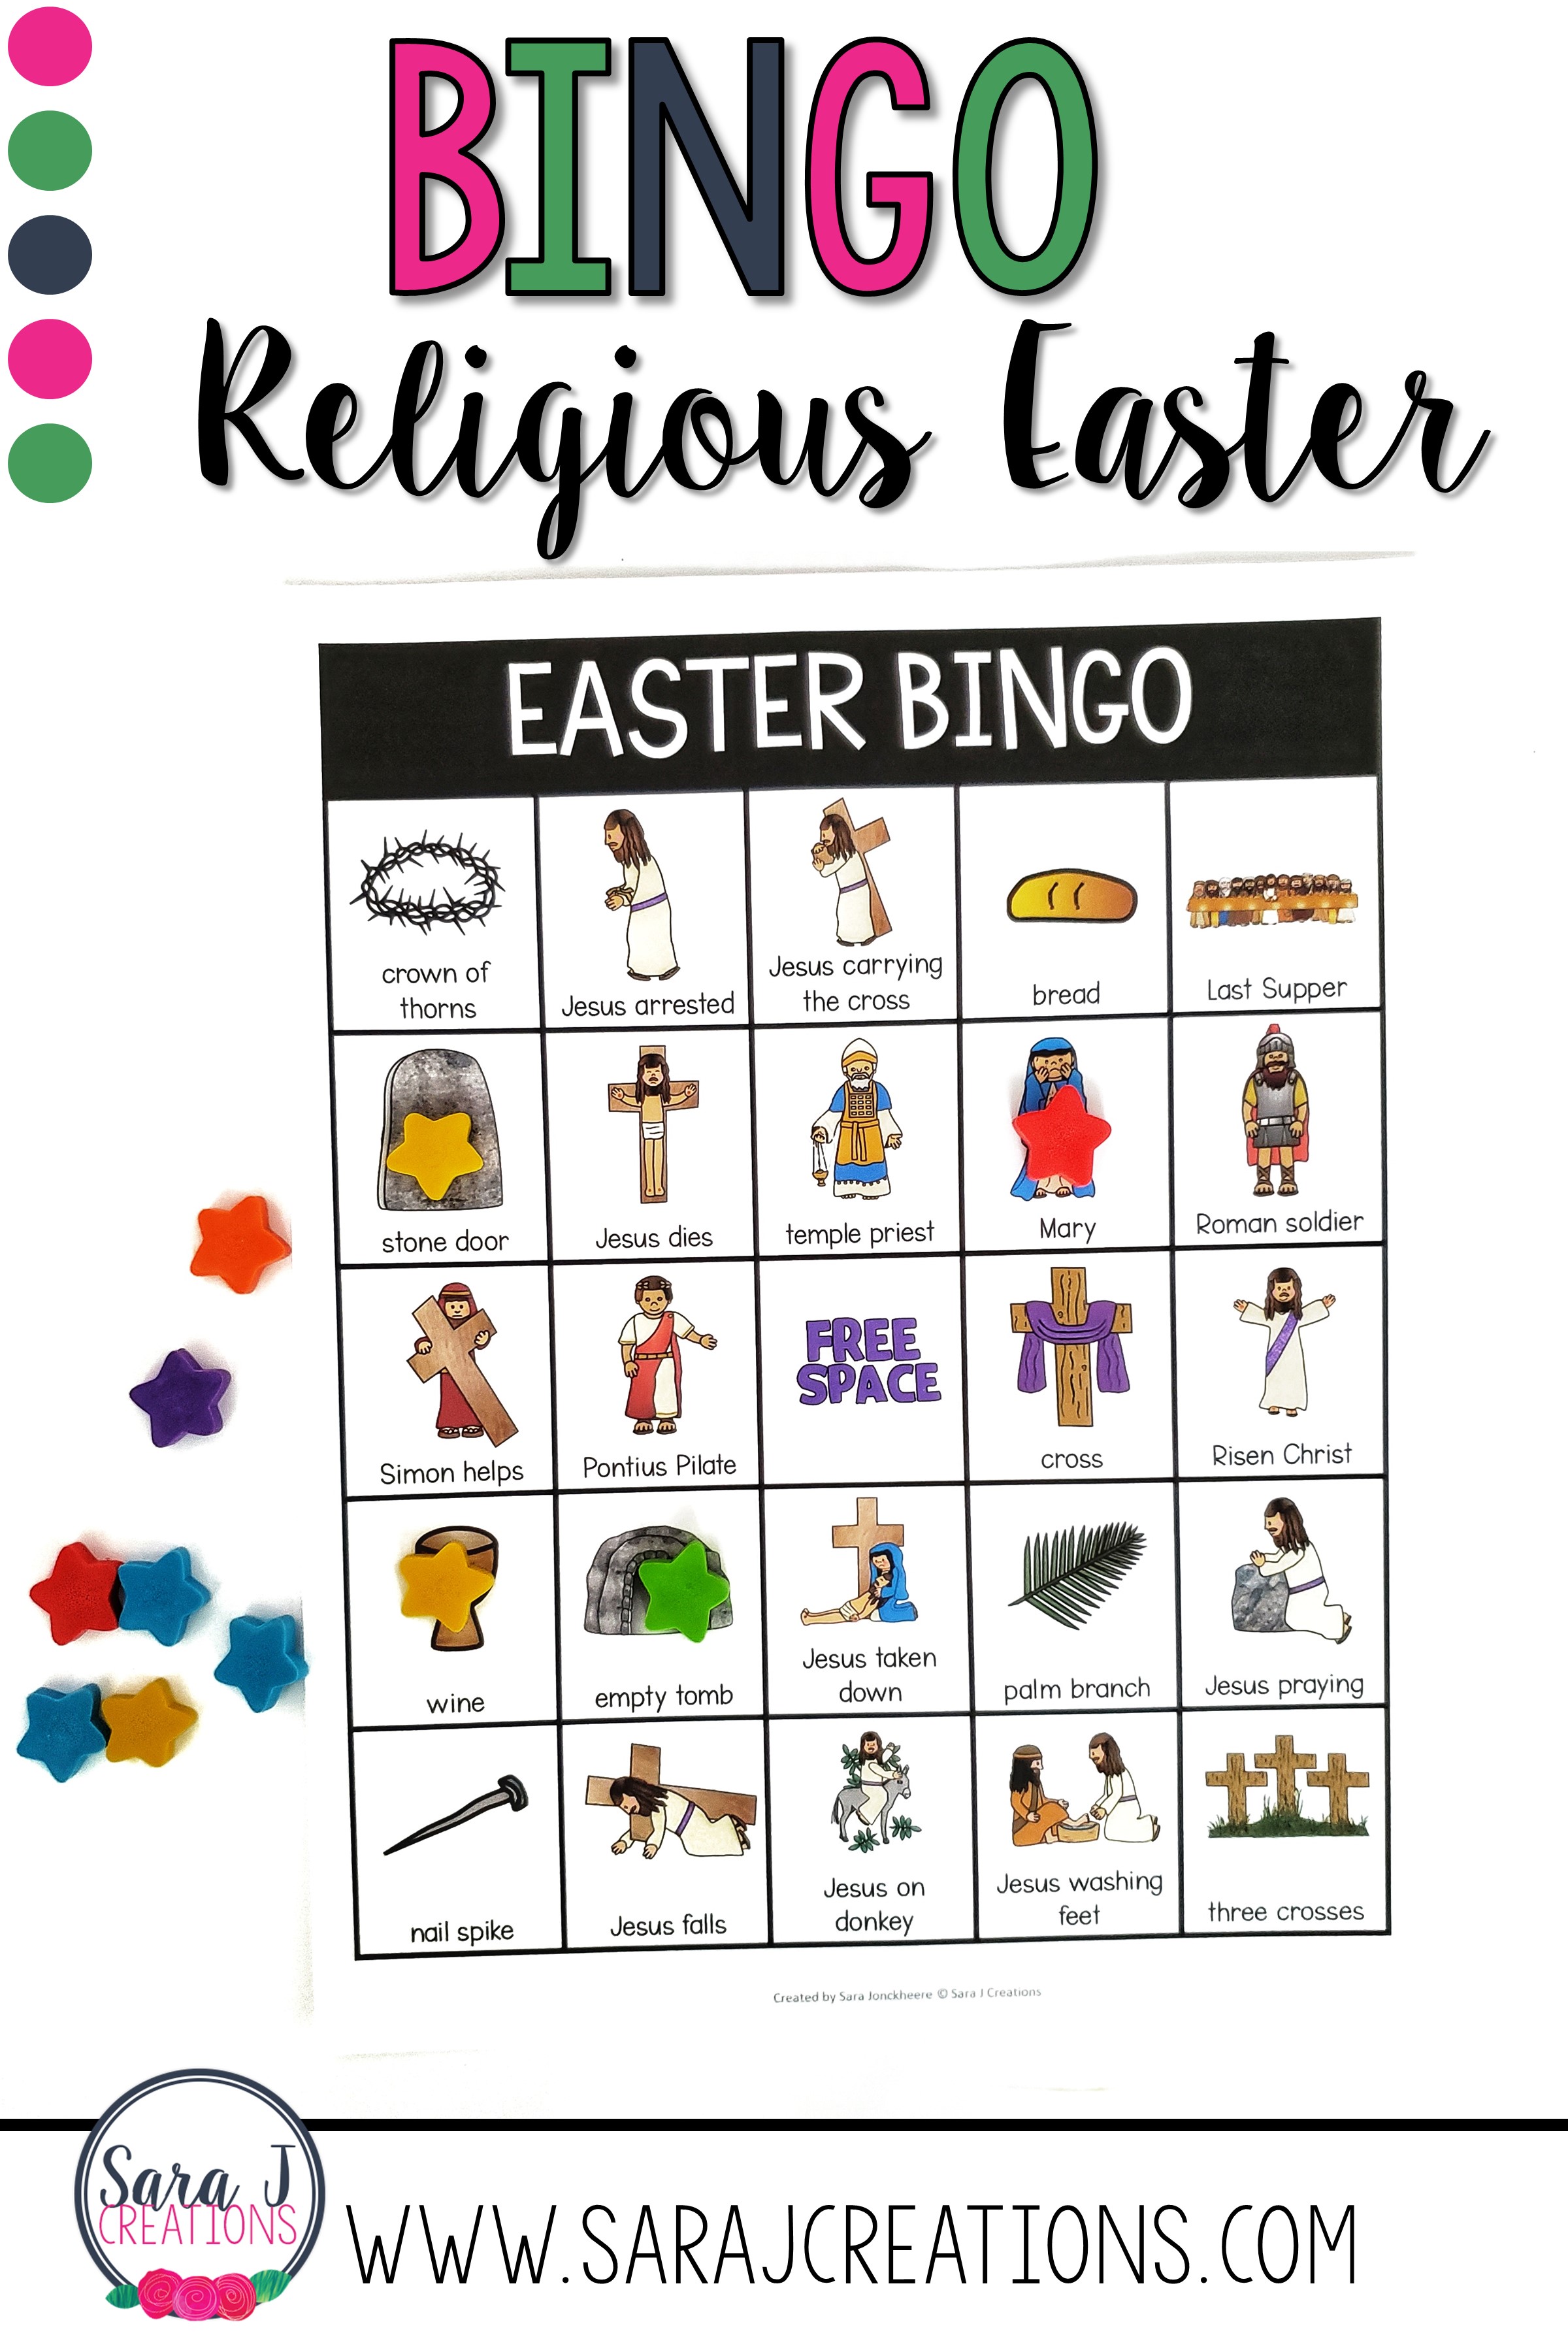 Religious Easter Bingo is a fun game for kids to play to review Holy Week and the story of Easter.  I love that this keeps the focus on Jesus instead of the Easter Bunny.